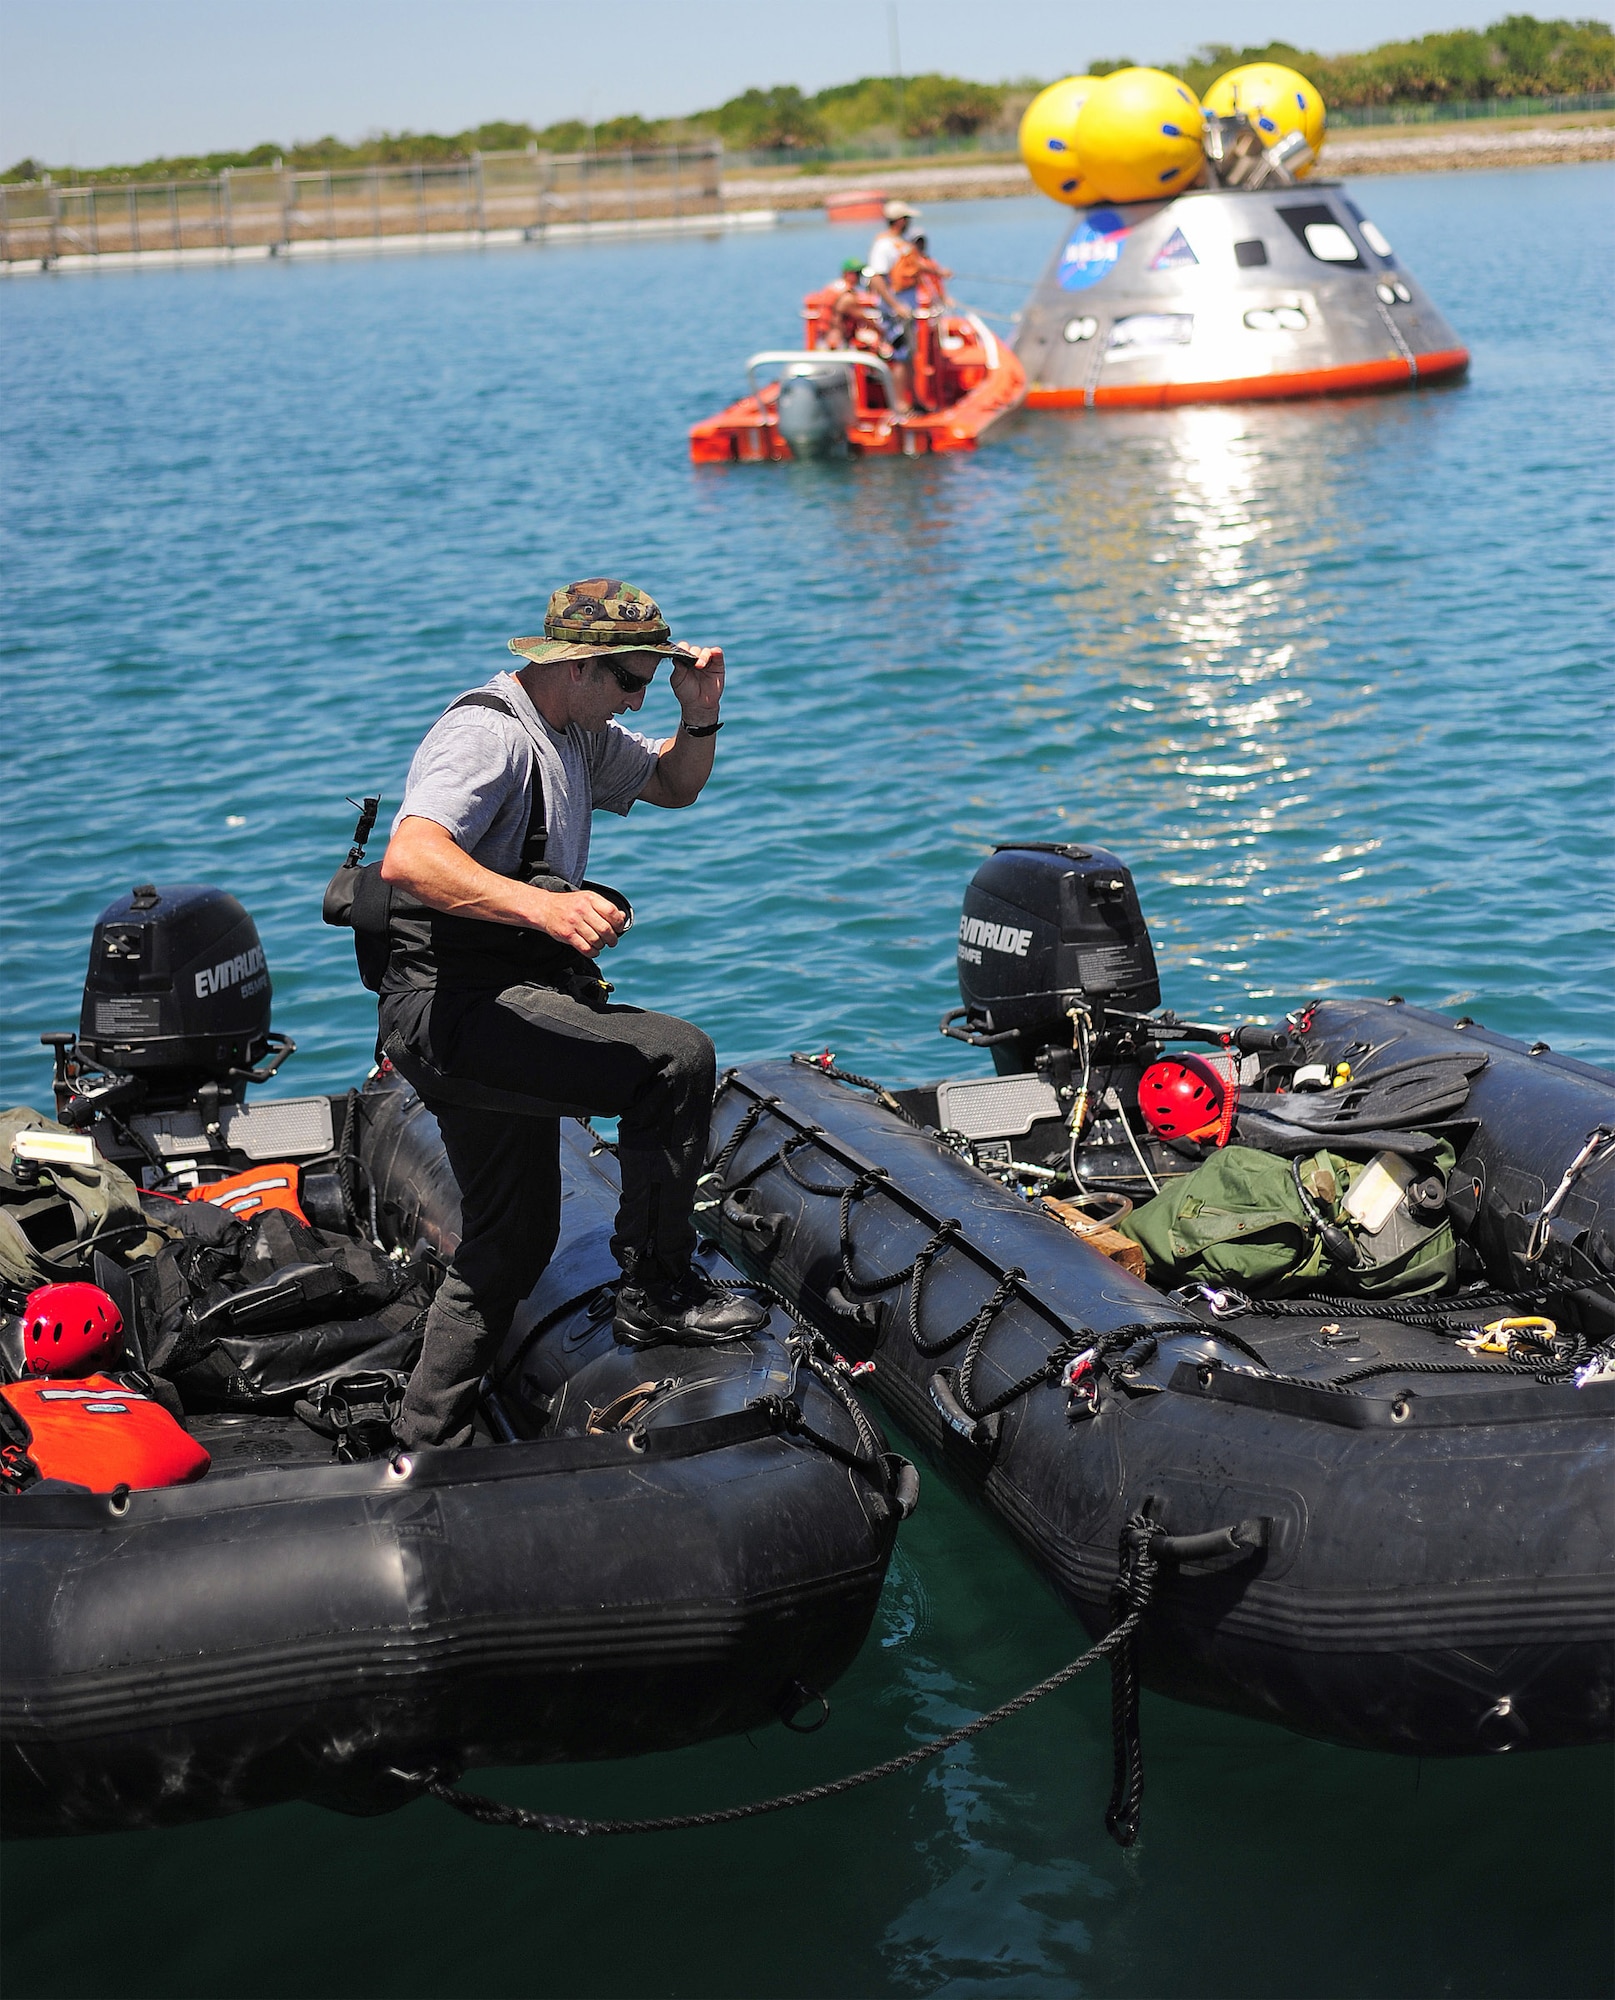 Master Sgt. Chris Seinkner uses a pair of inflatable Zodiac boats as a bridge back to dry land after testing a mockup of the Orion crew exploration vehicle (seen in the background) March 8 at the Trident Basin at Port Canaveral, Fla. Sergeant Seinkner was part of a six-man team of pararescuemen testing an inflatable flotation collar. The collar is designed both to stabilize the capsule after water landing and provide a platform for recovery personnel to stand on during the operation. Sergeant Seinkner is a pararescueman from the Air Force Reserve's 920th Rescue Wing. (U.S. Air Force photo/Tech. Sgt. Paul Flipse) 
